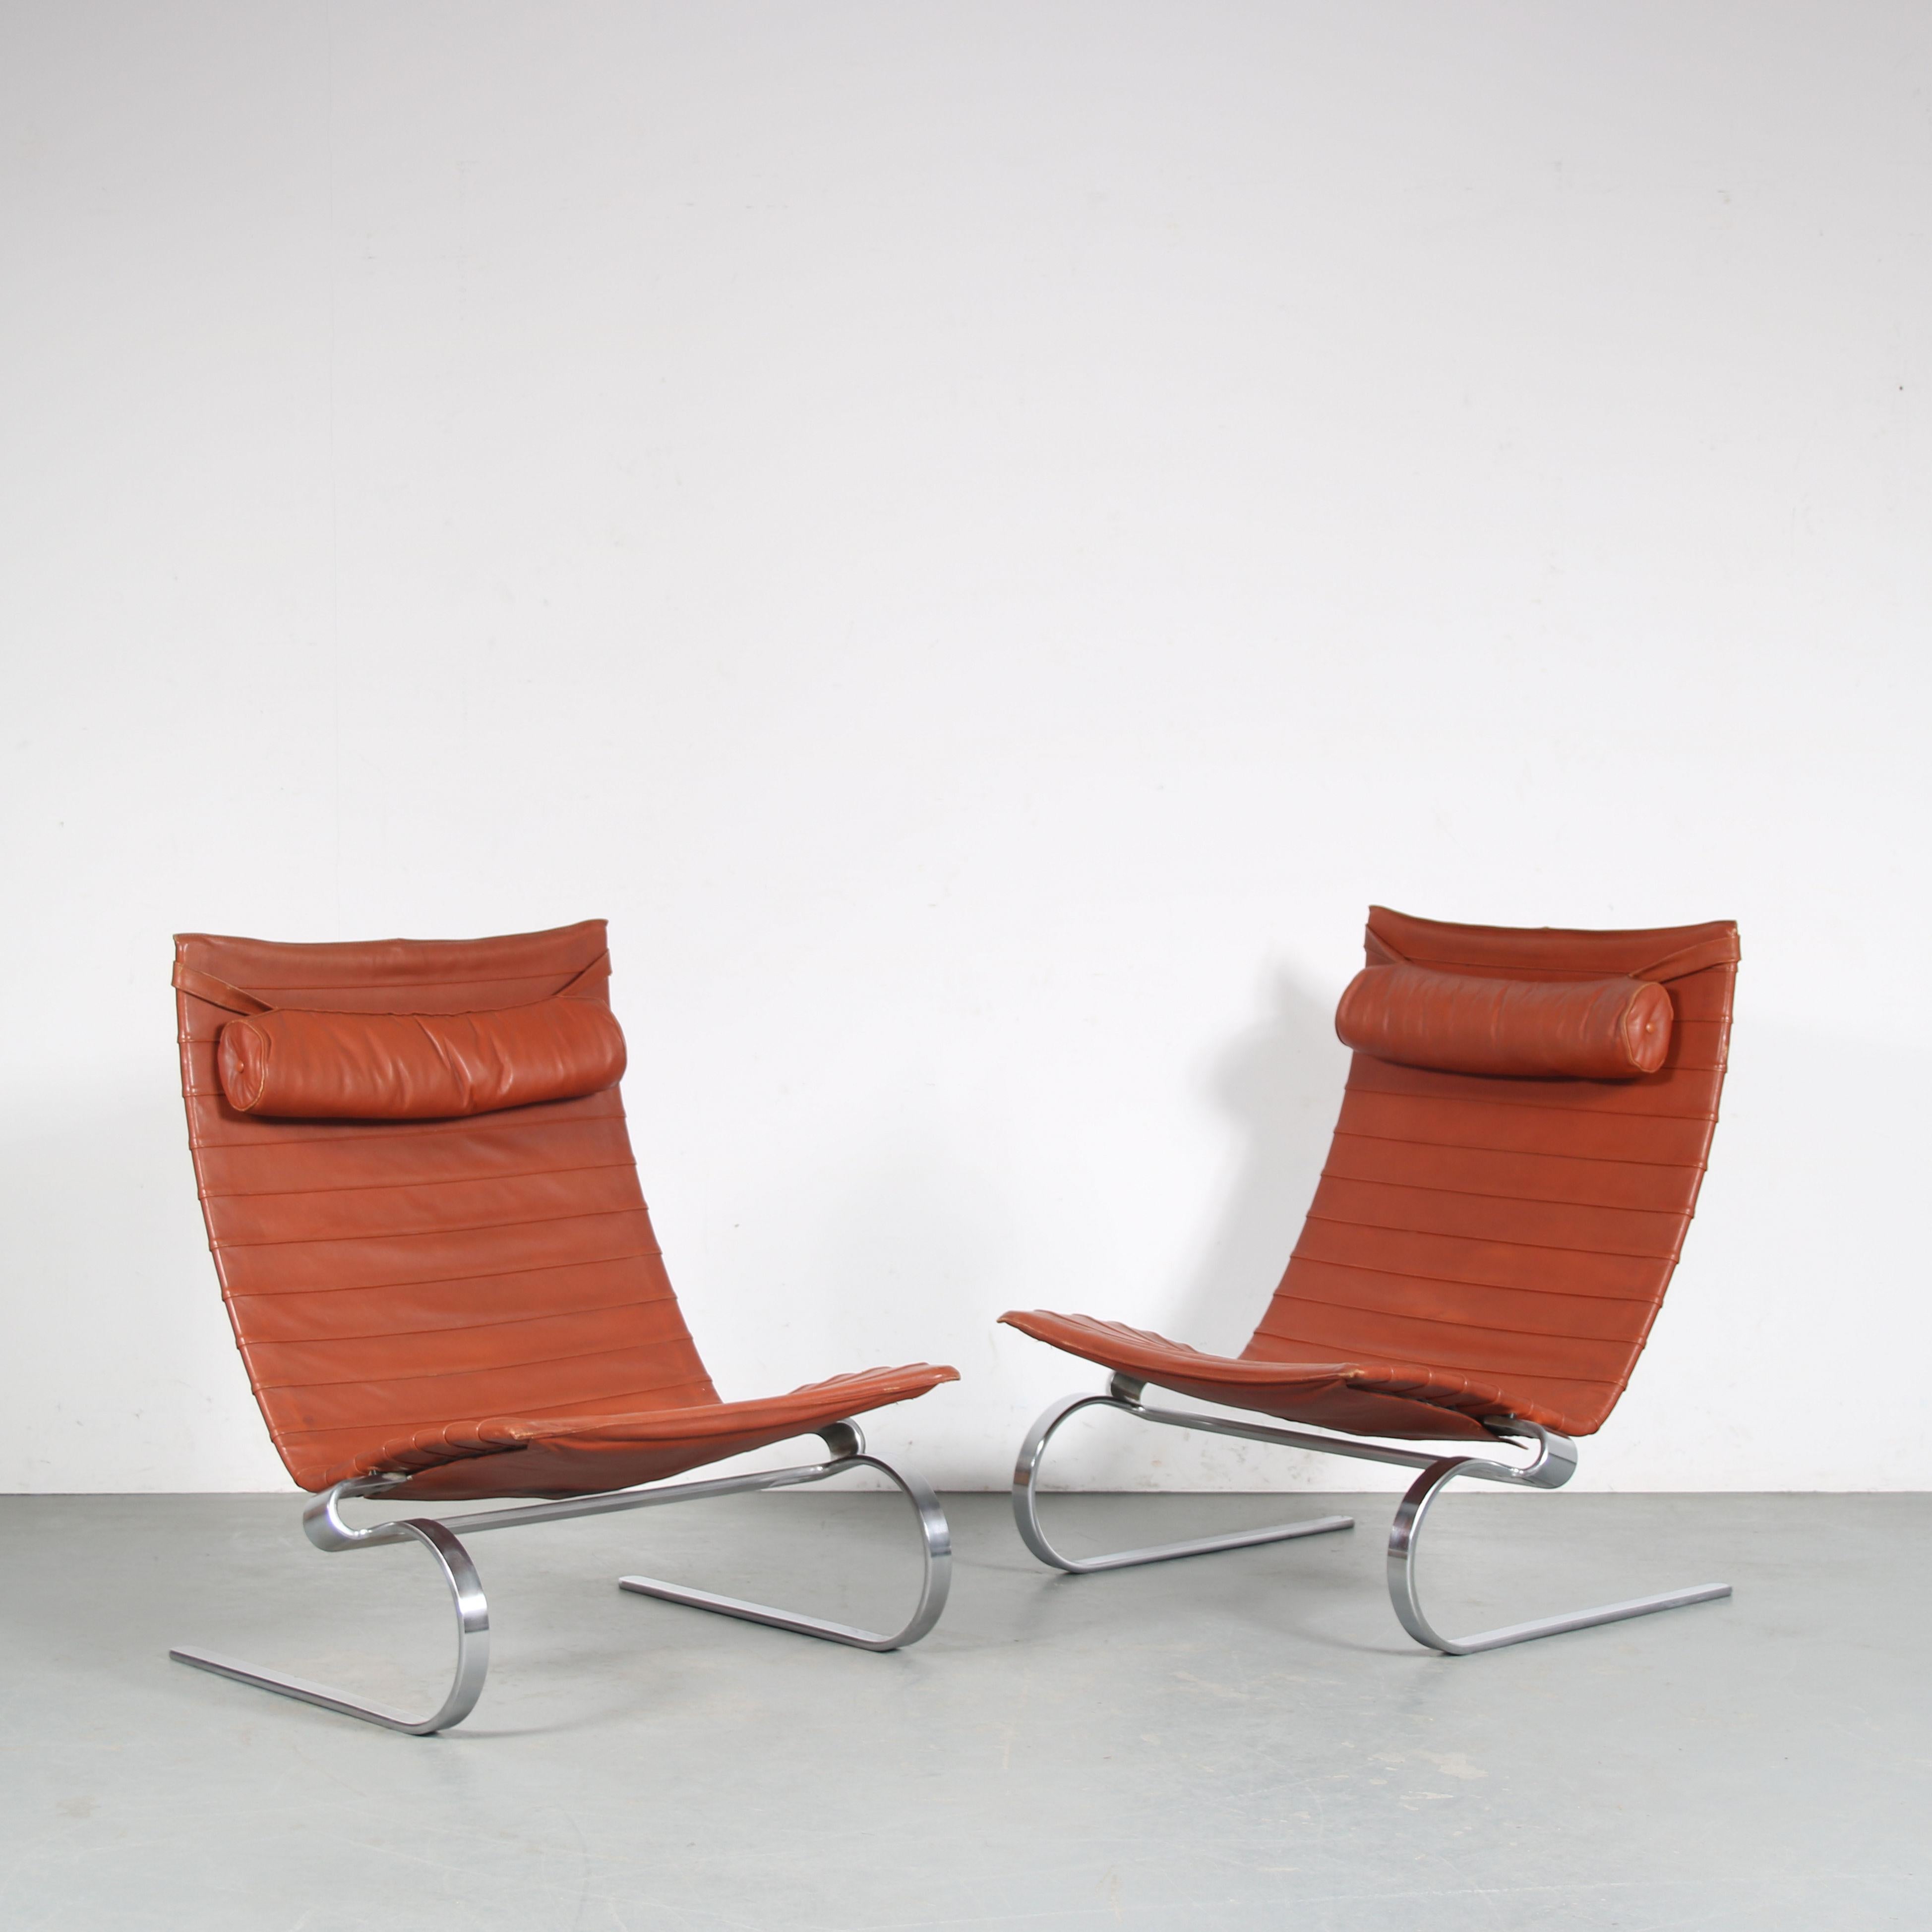 A beautiful pair of PK20 highback lounge chairs, designed by Poul Kjaerholm and manufactured by E. Kold Christensen in Denmark around 1960.

This very rare set is guaranteed to draw the attention of any design enthusiast! Each chairs has a